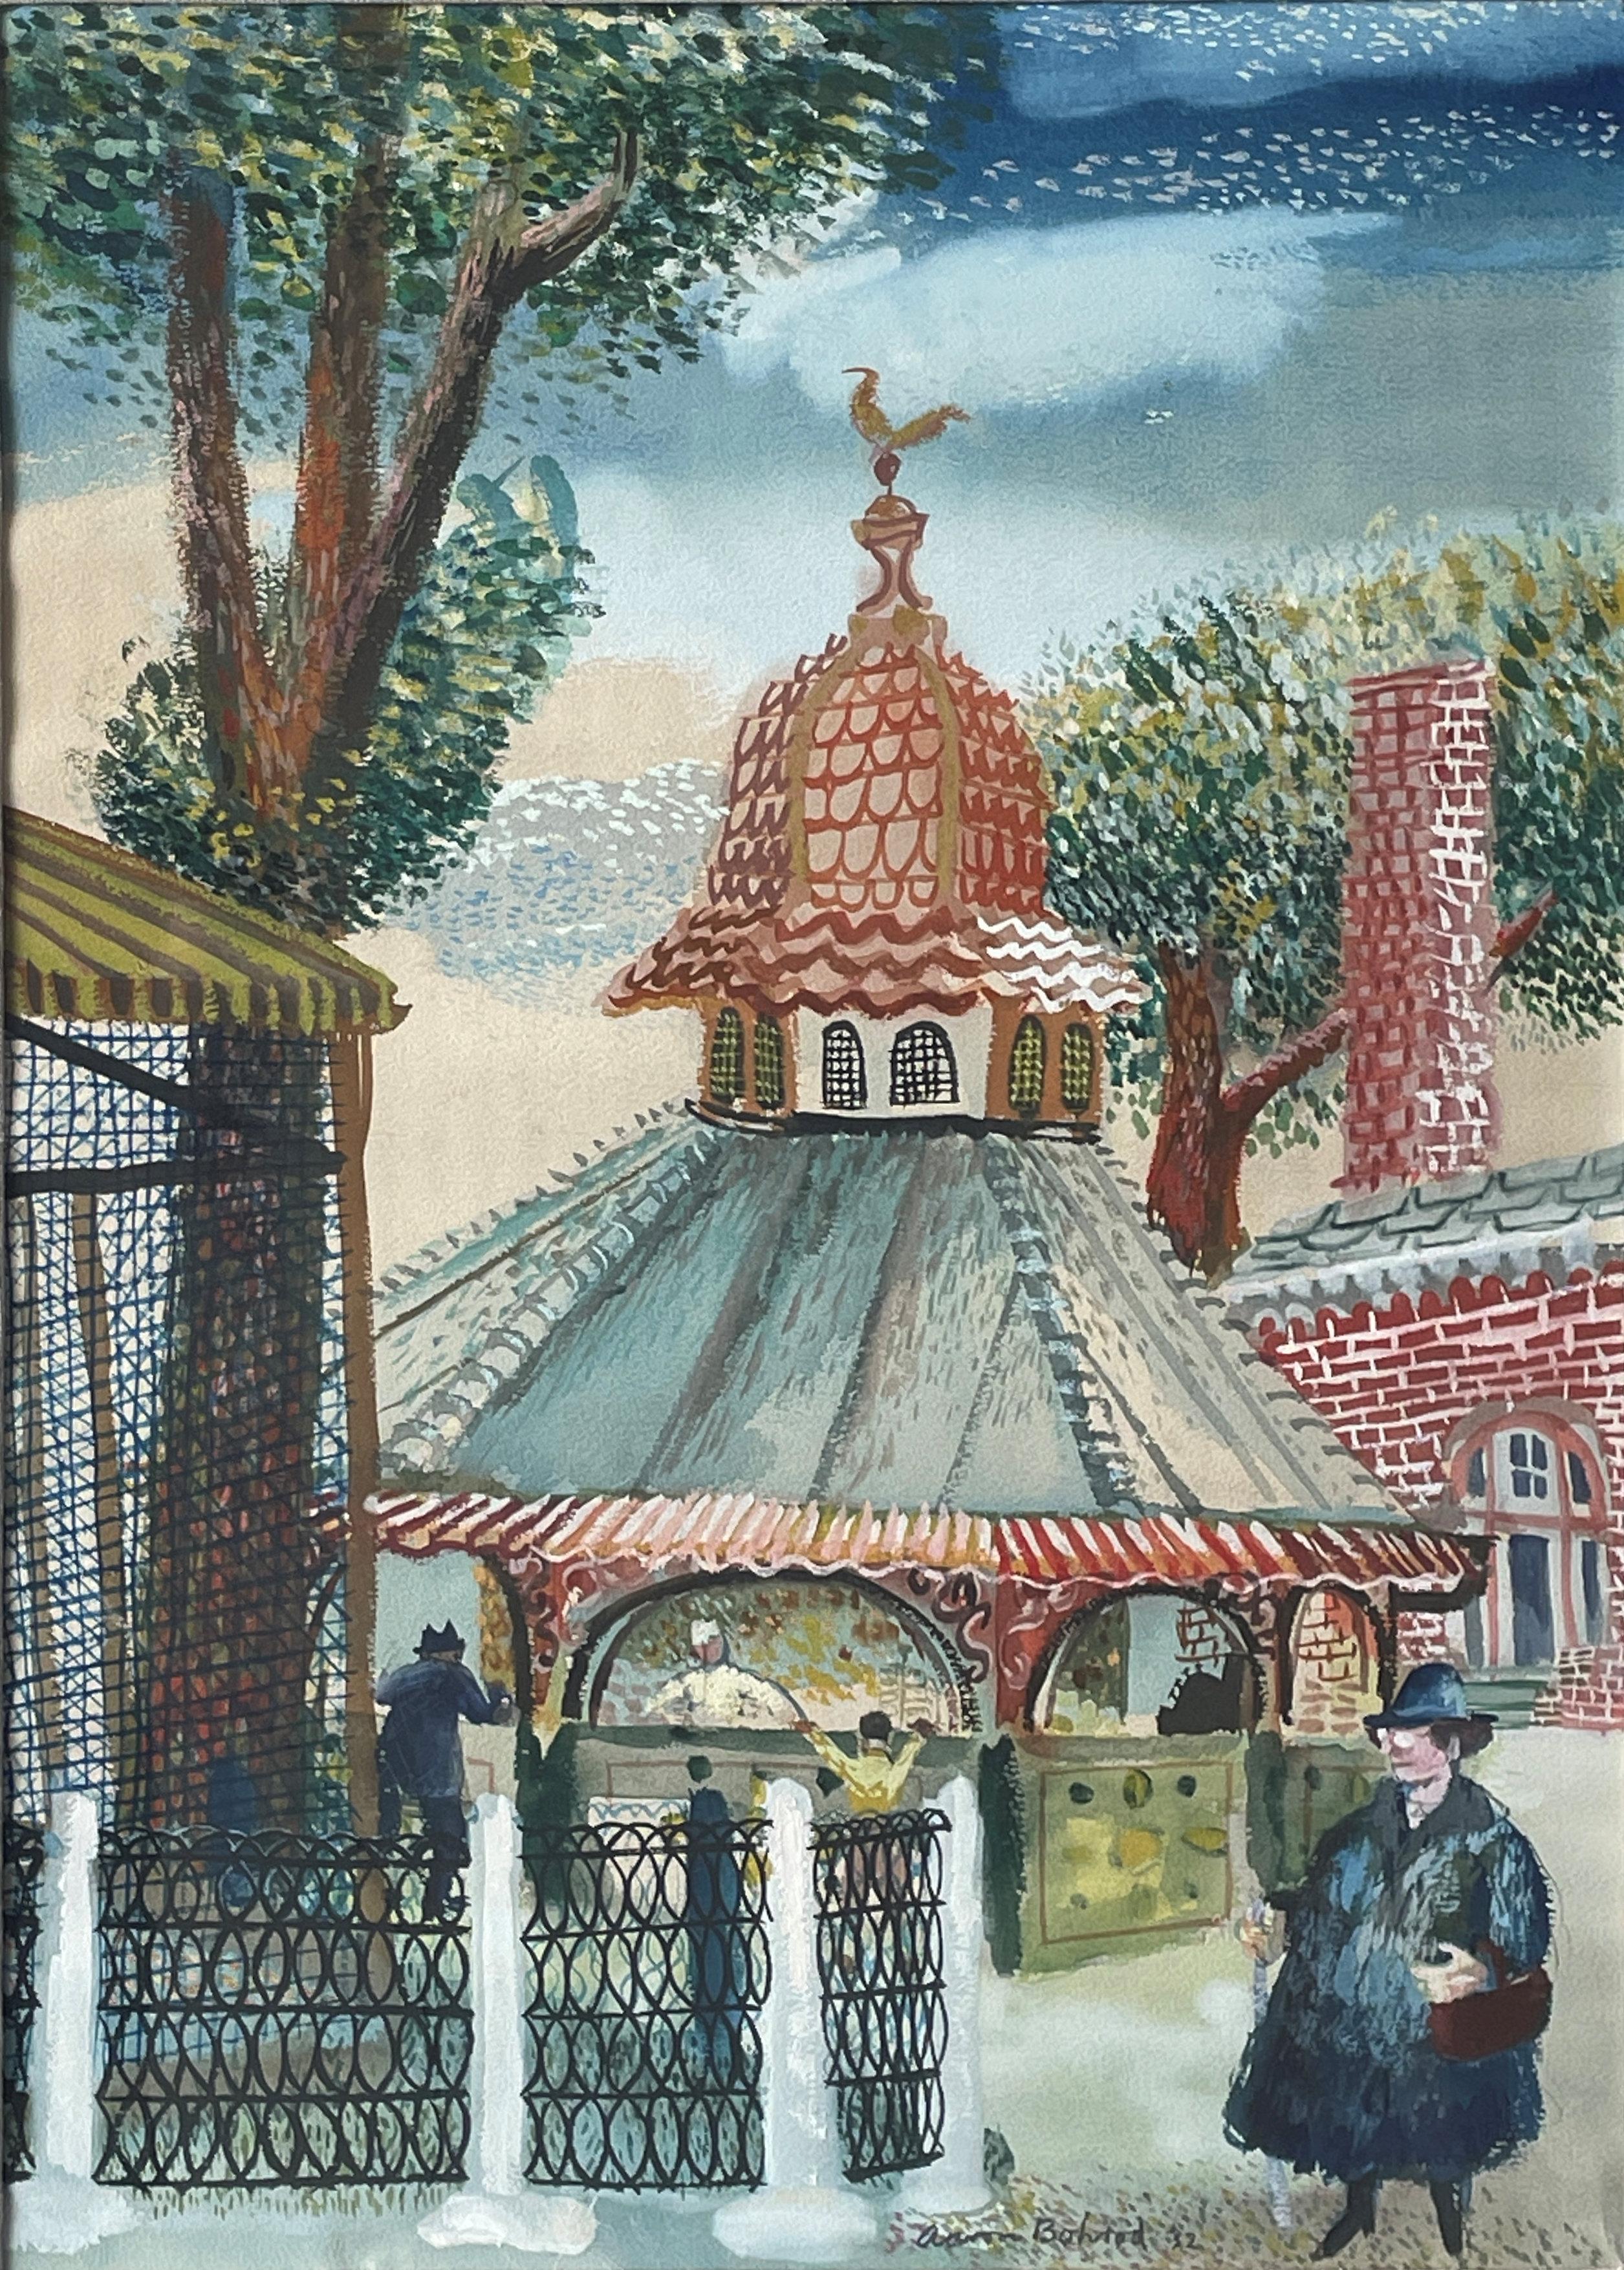 Aaron Bohrod
The Kiosk, Lincoln Park Zoo, Chicago, 1932
Signed and dated lower right
Watercolor on paper
17 x 12 inches

Provenance:
The artist
Everett Oehlschlager Galleries, Chicago
Private Collection, Massachusetts

Known for a range of work in